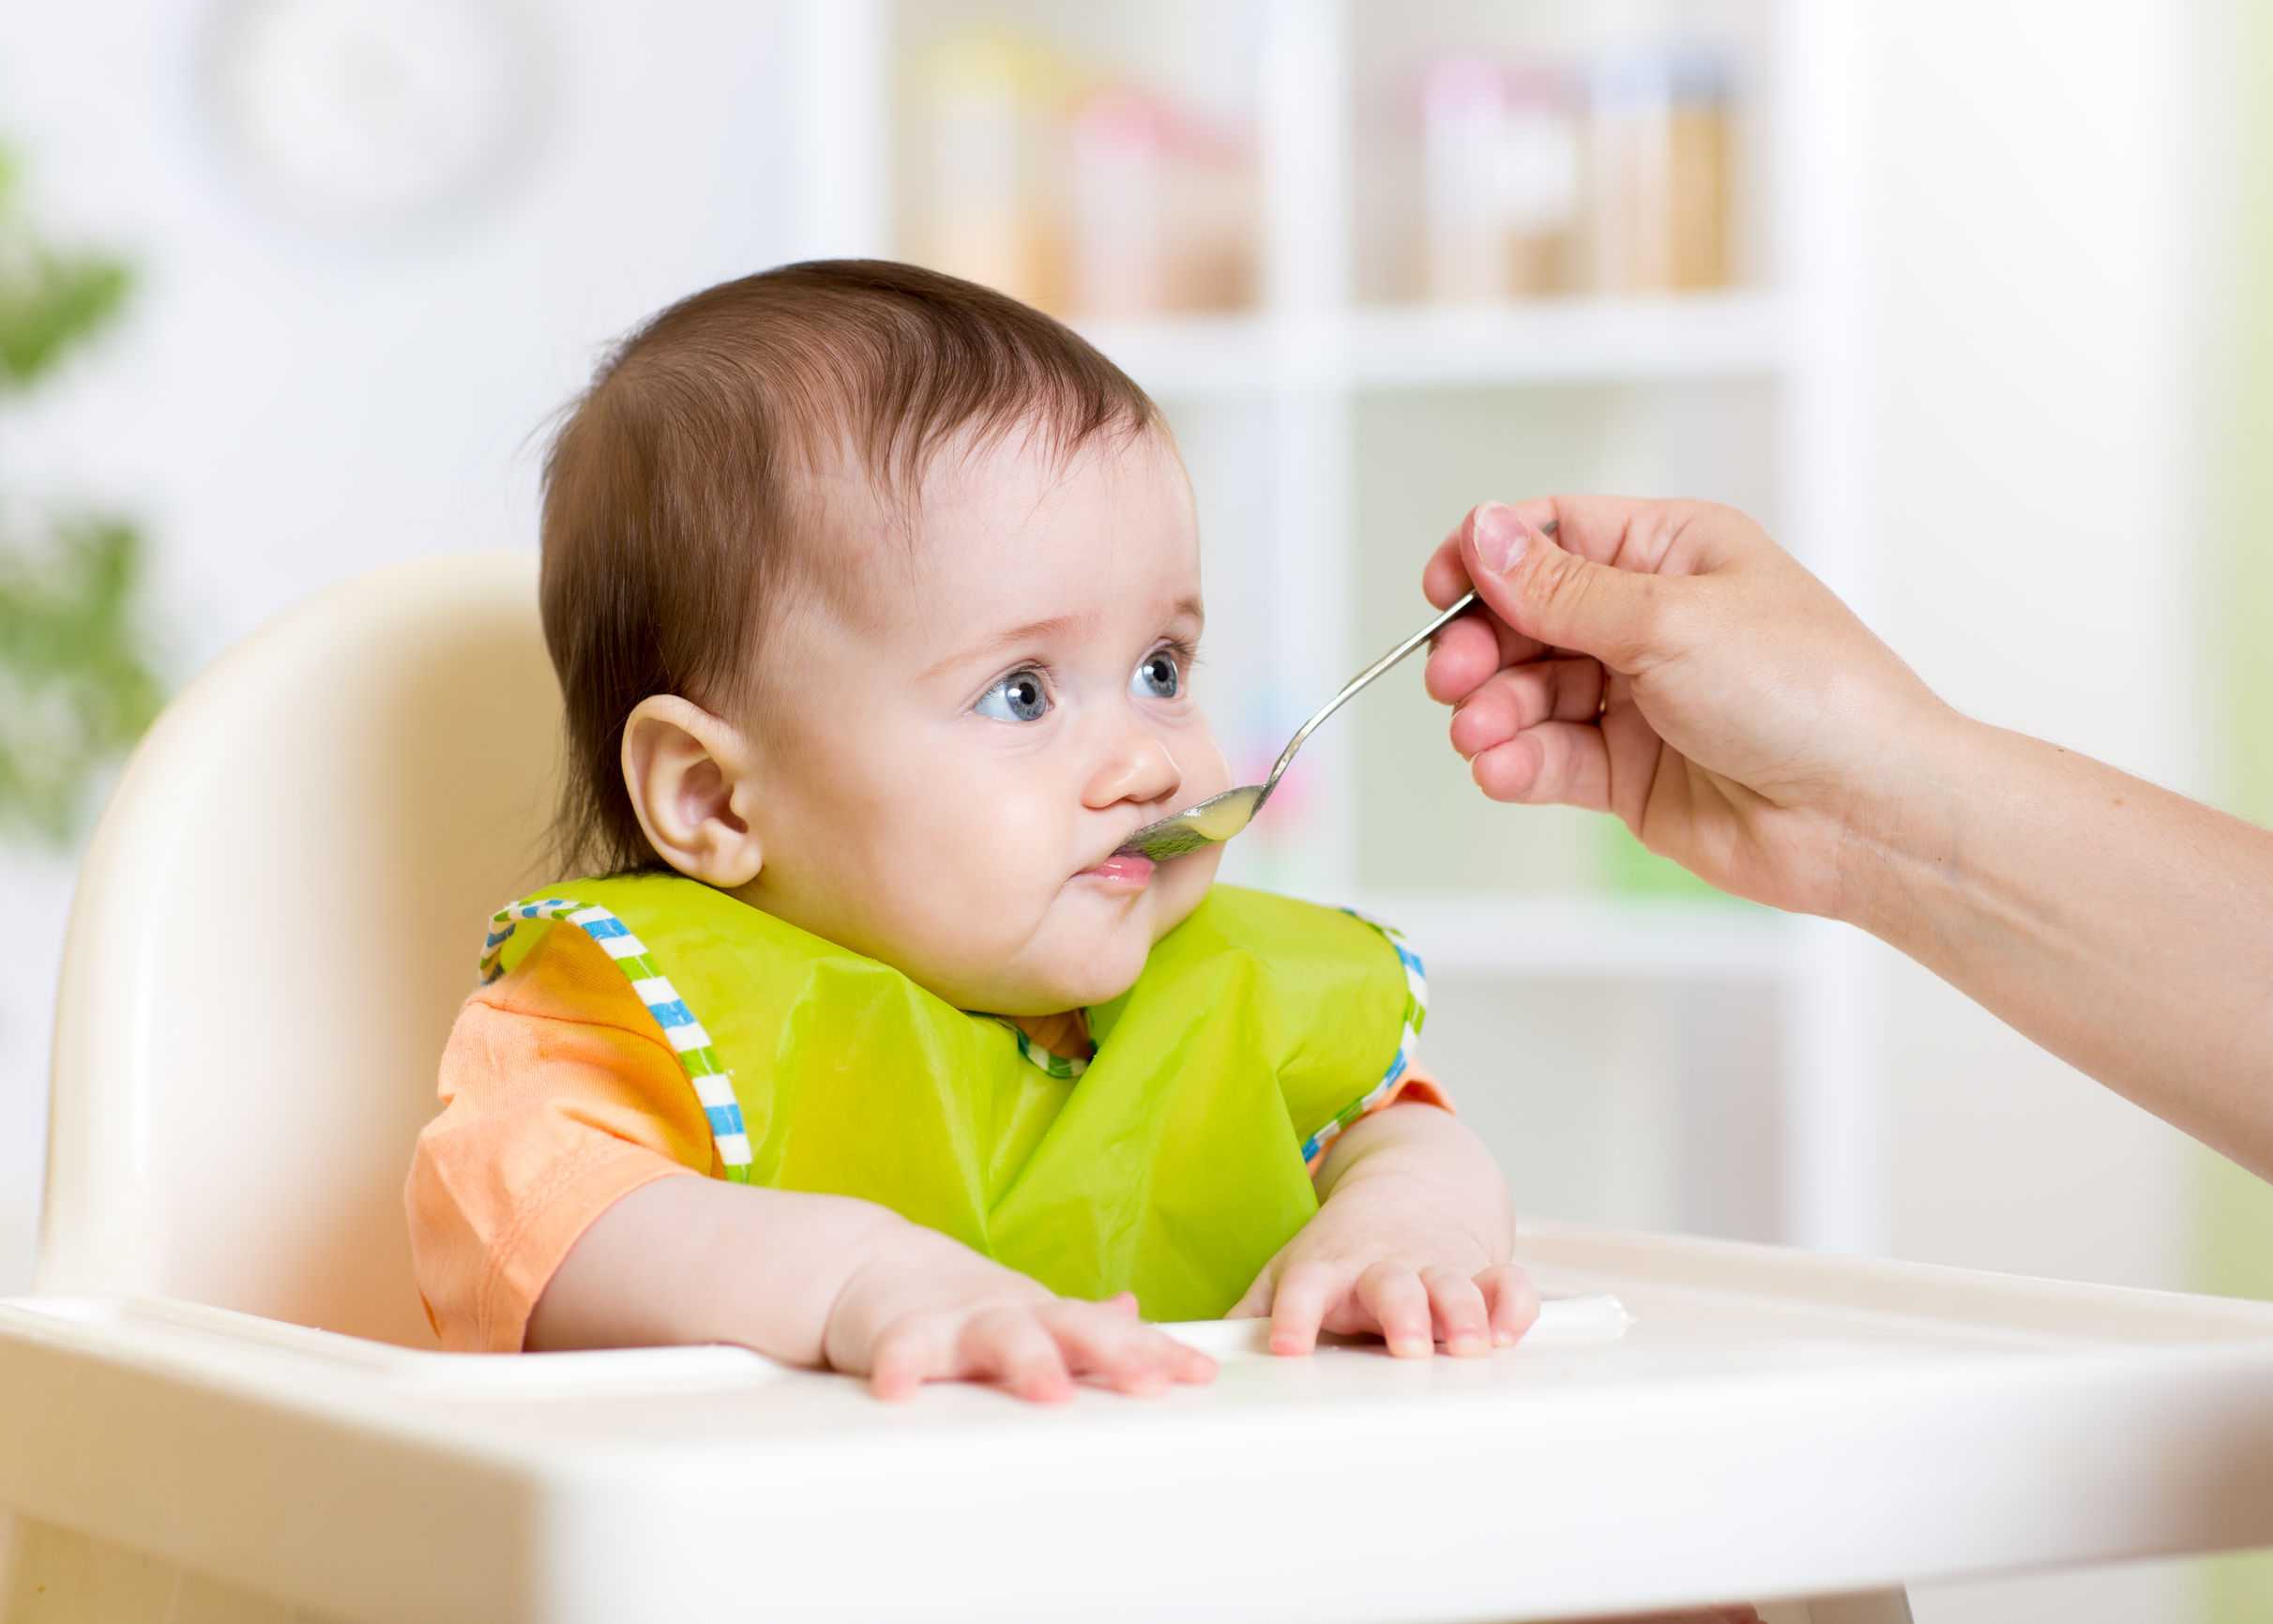 Is Your Baby Ready for Solid Food?